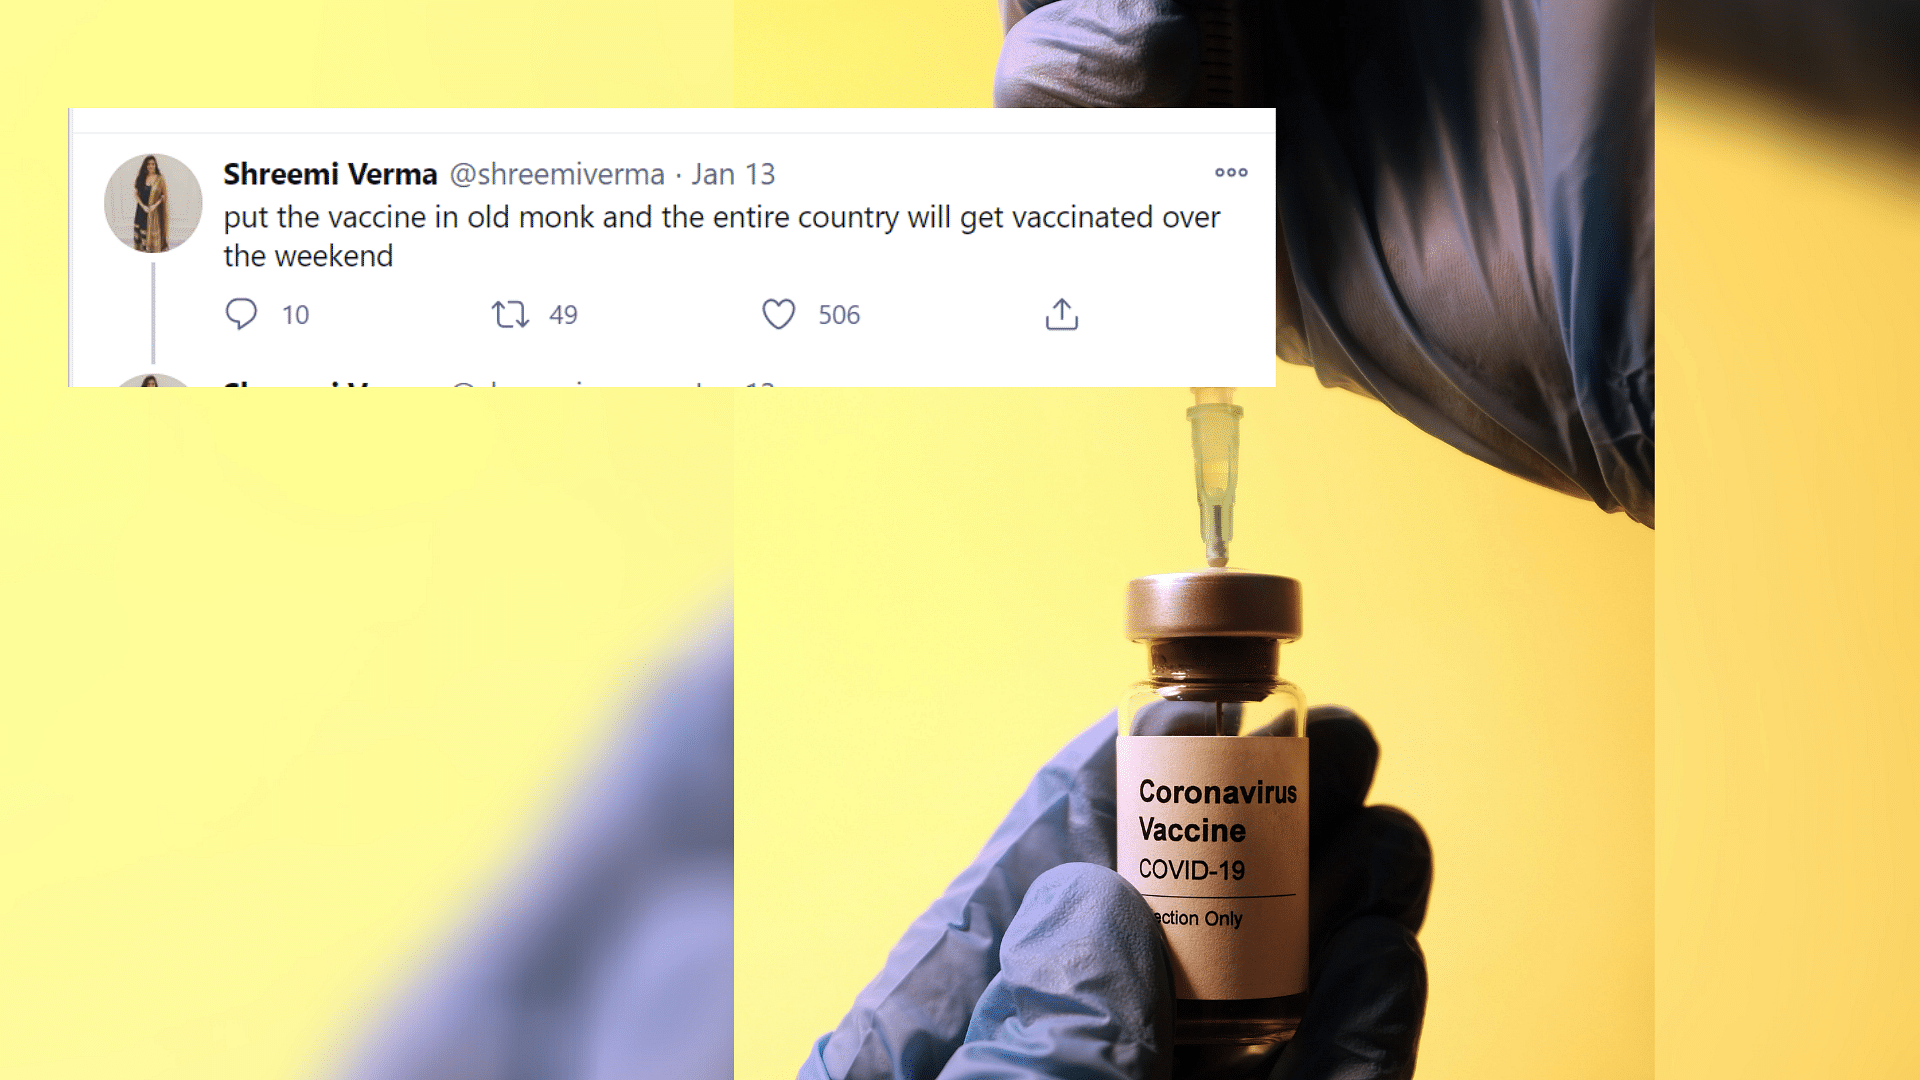 Want to Vaccinate the Country? Twitter Has Some Creative Ideas